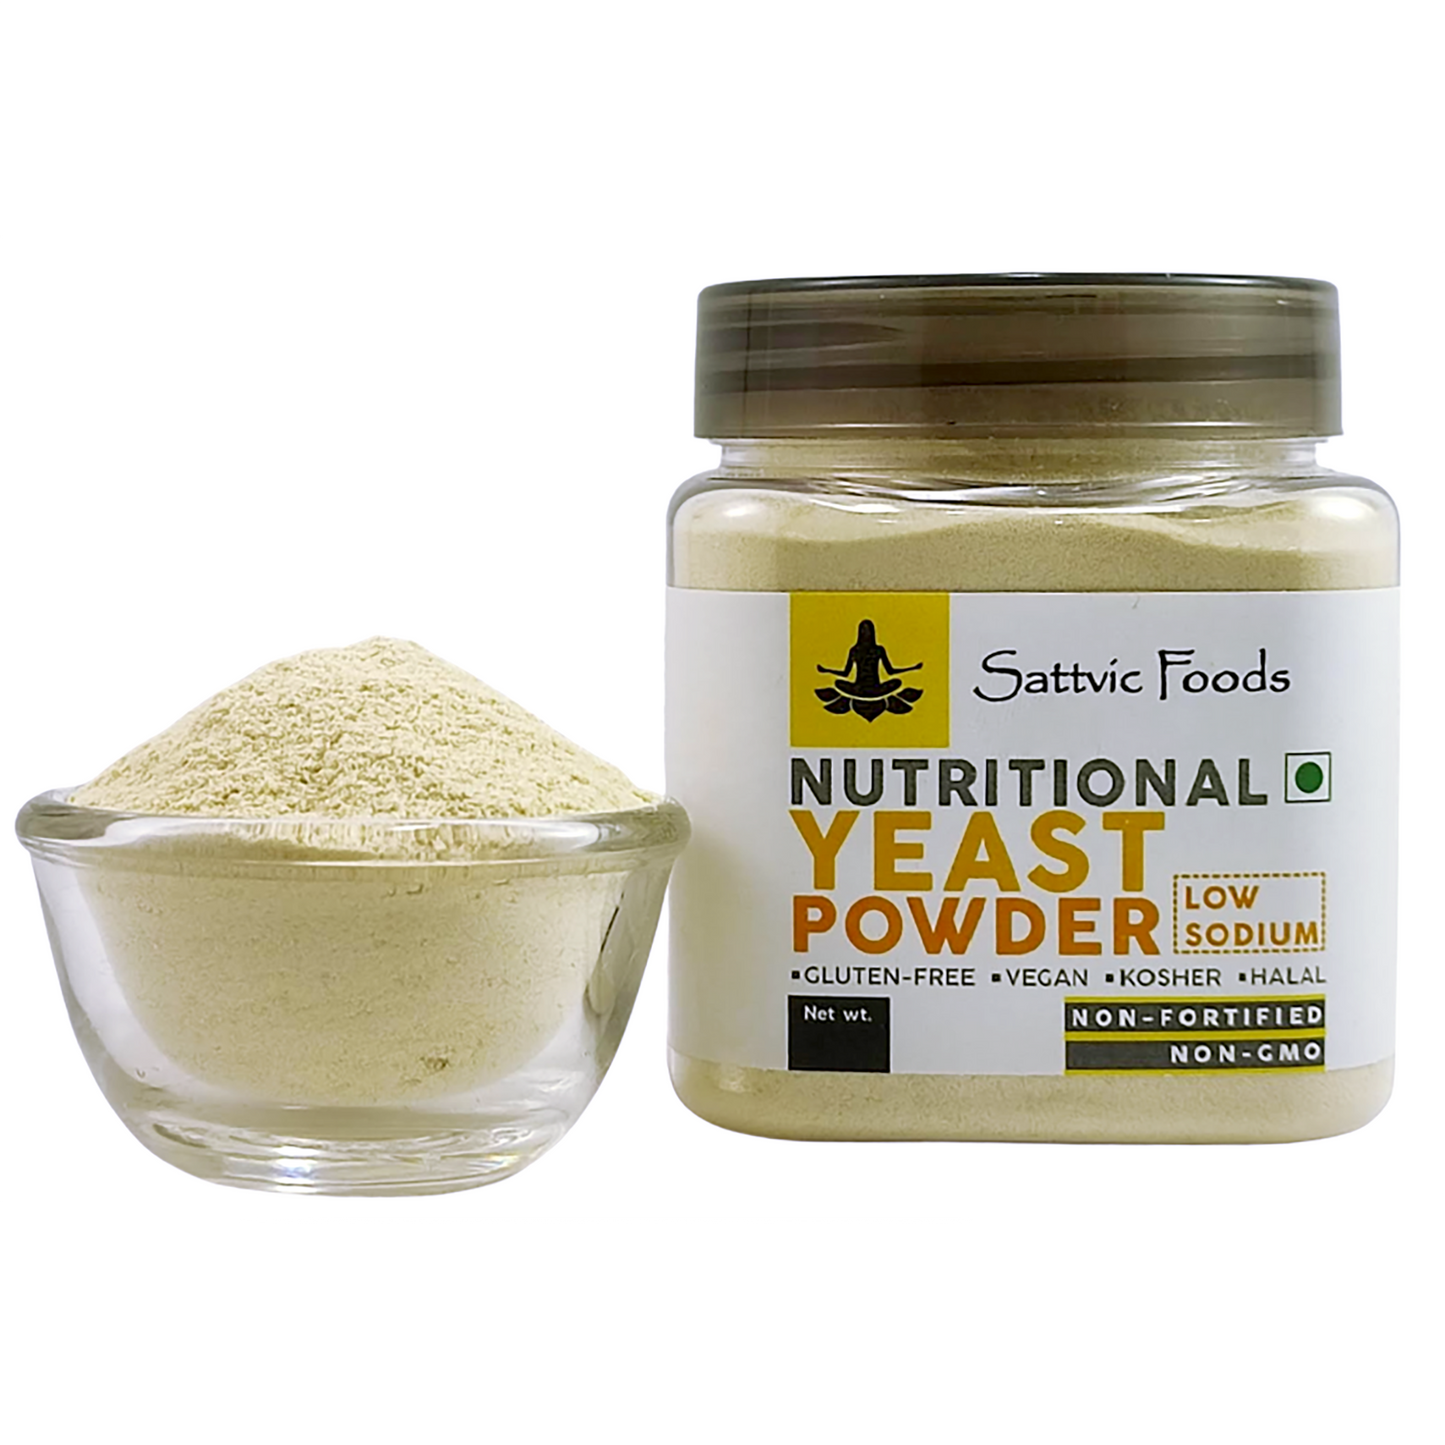 Nutritional Yeast Bland Powder - with loose - Sattvic Foods